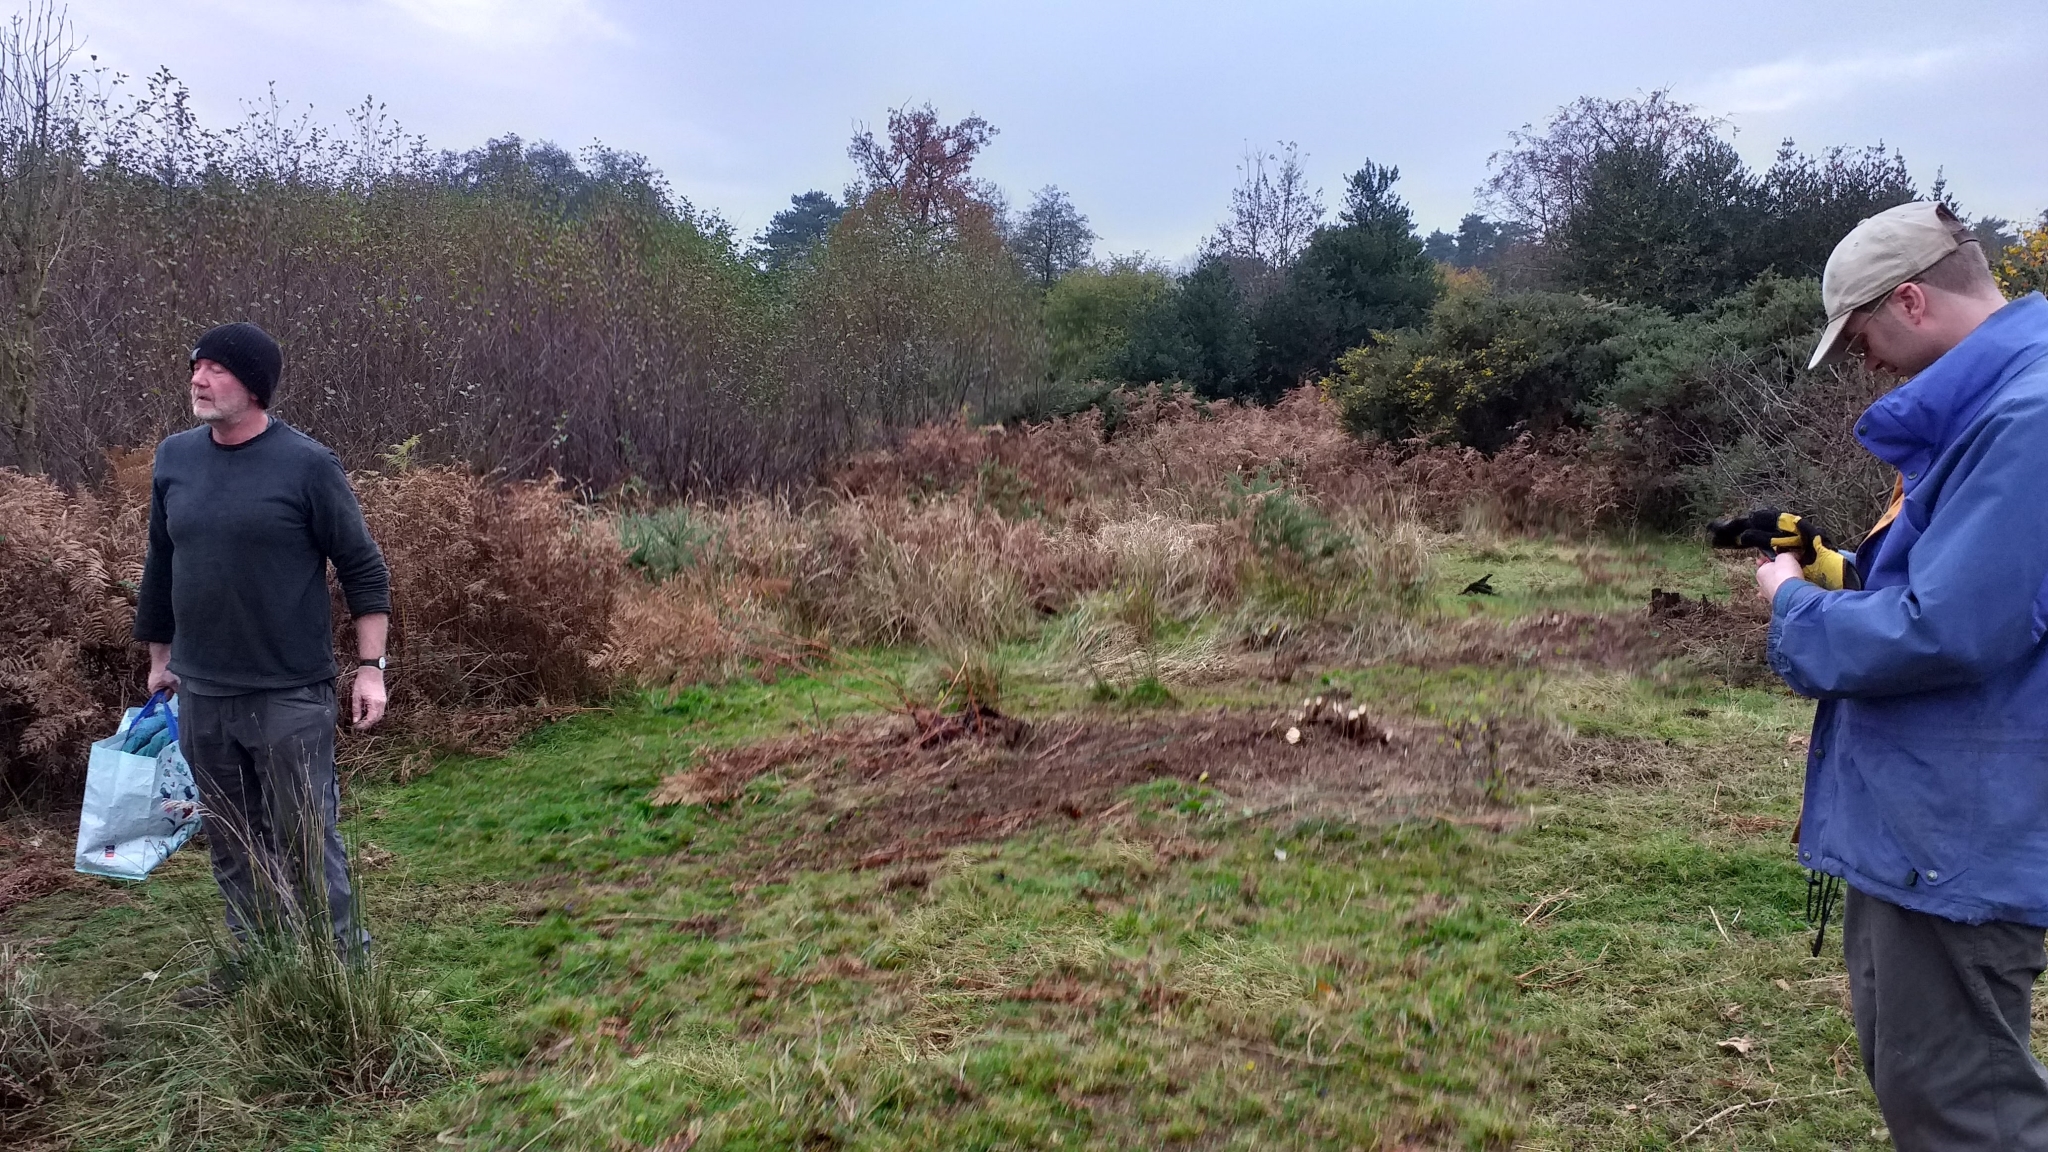 A photo from the FoTF Conservation Event - November 2019 - Gorse Clearance at Hockham Hills & Holes : Volunteers at the work site